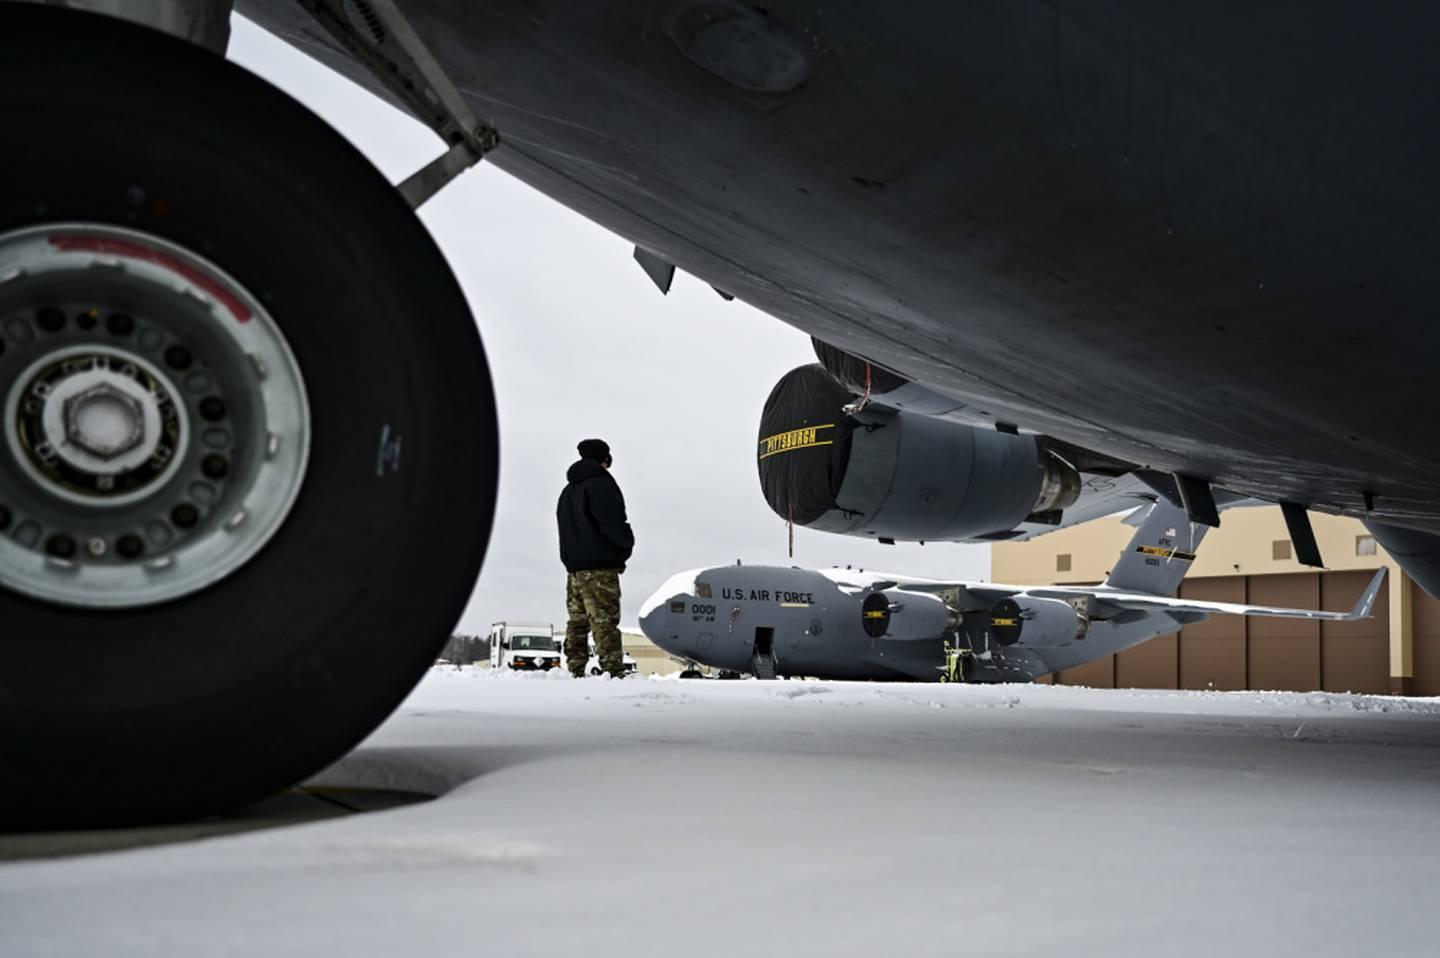 An Airman assigned to the 911th Aircraft Maintenance Squadron conducts a walk-around inspection on a C-17 Globemaster III at the Pittsburgh International Airport Air Reserve Station, Pennsylvania, on Feb. 1, 2021. (Joshua  Hair, hands and hosiery: Air Force overhauling outdated rules on airmen’s looks